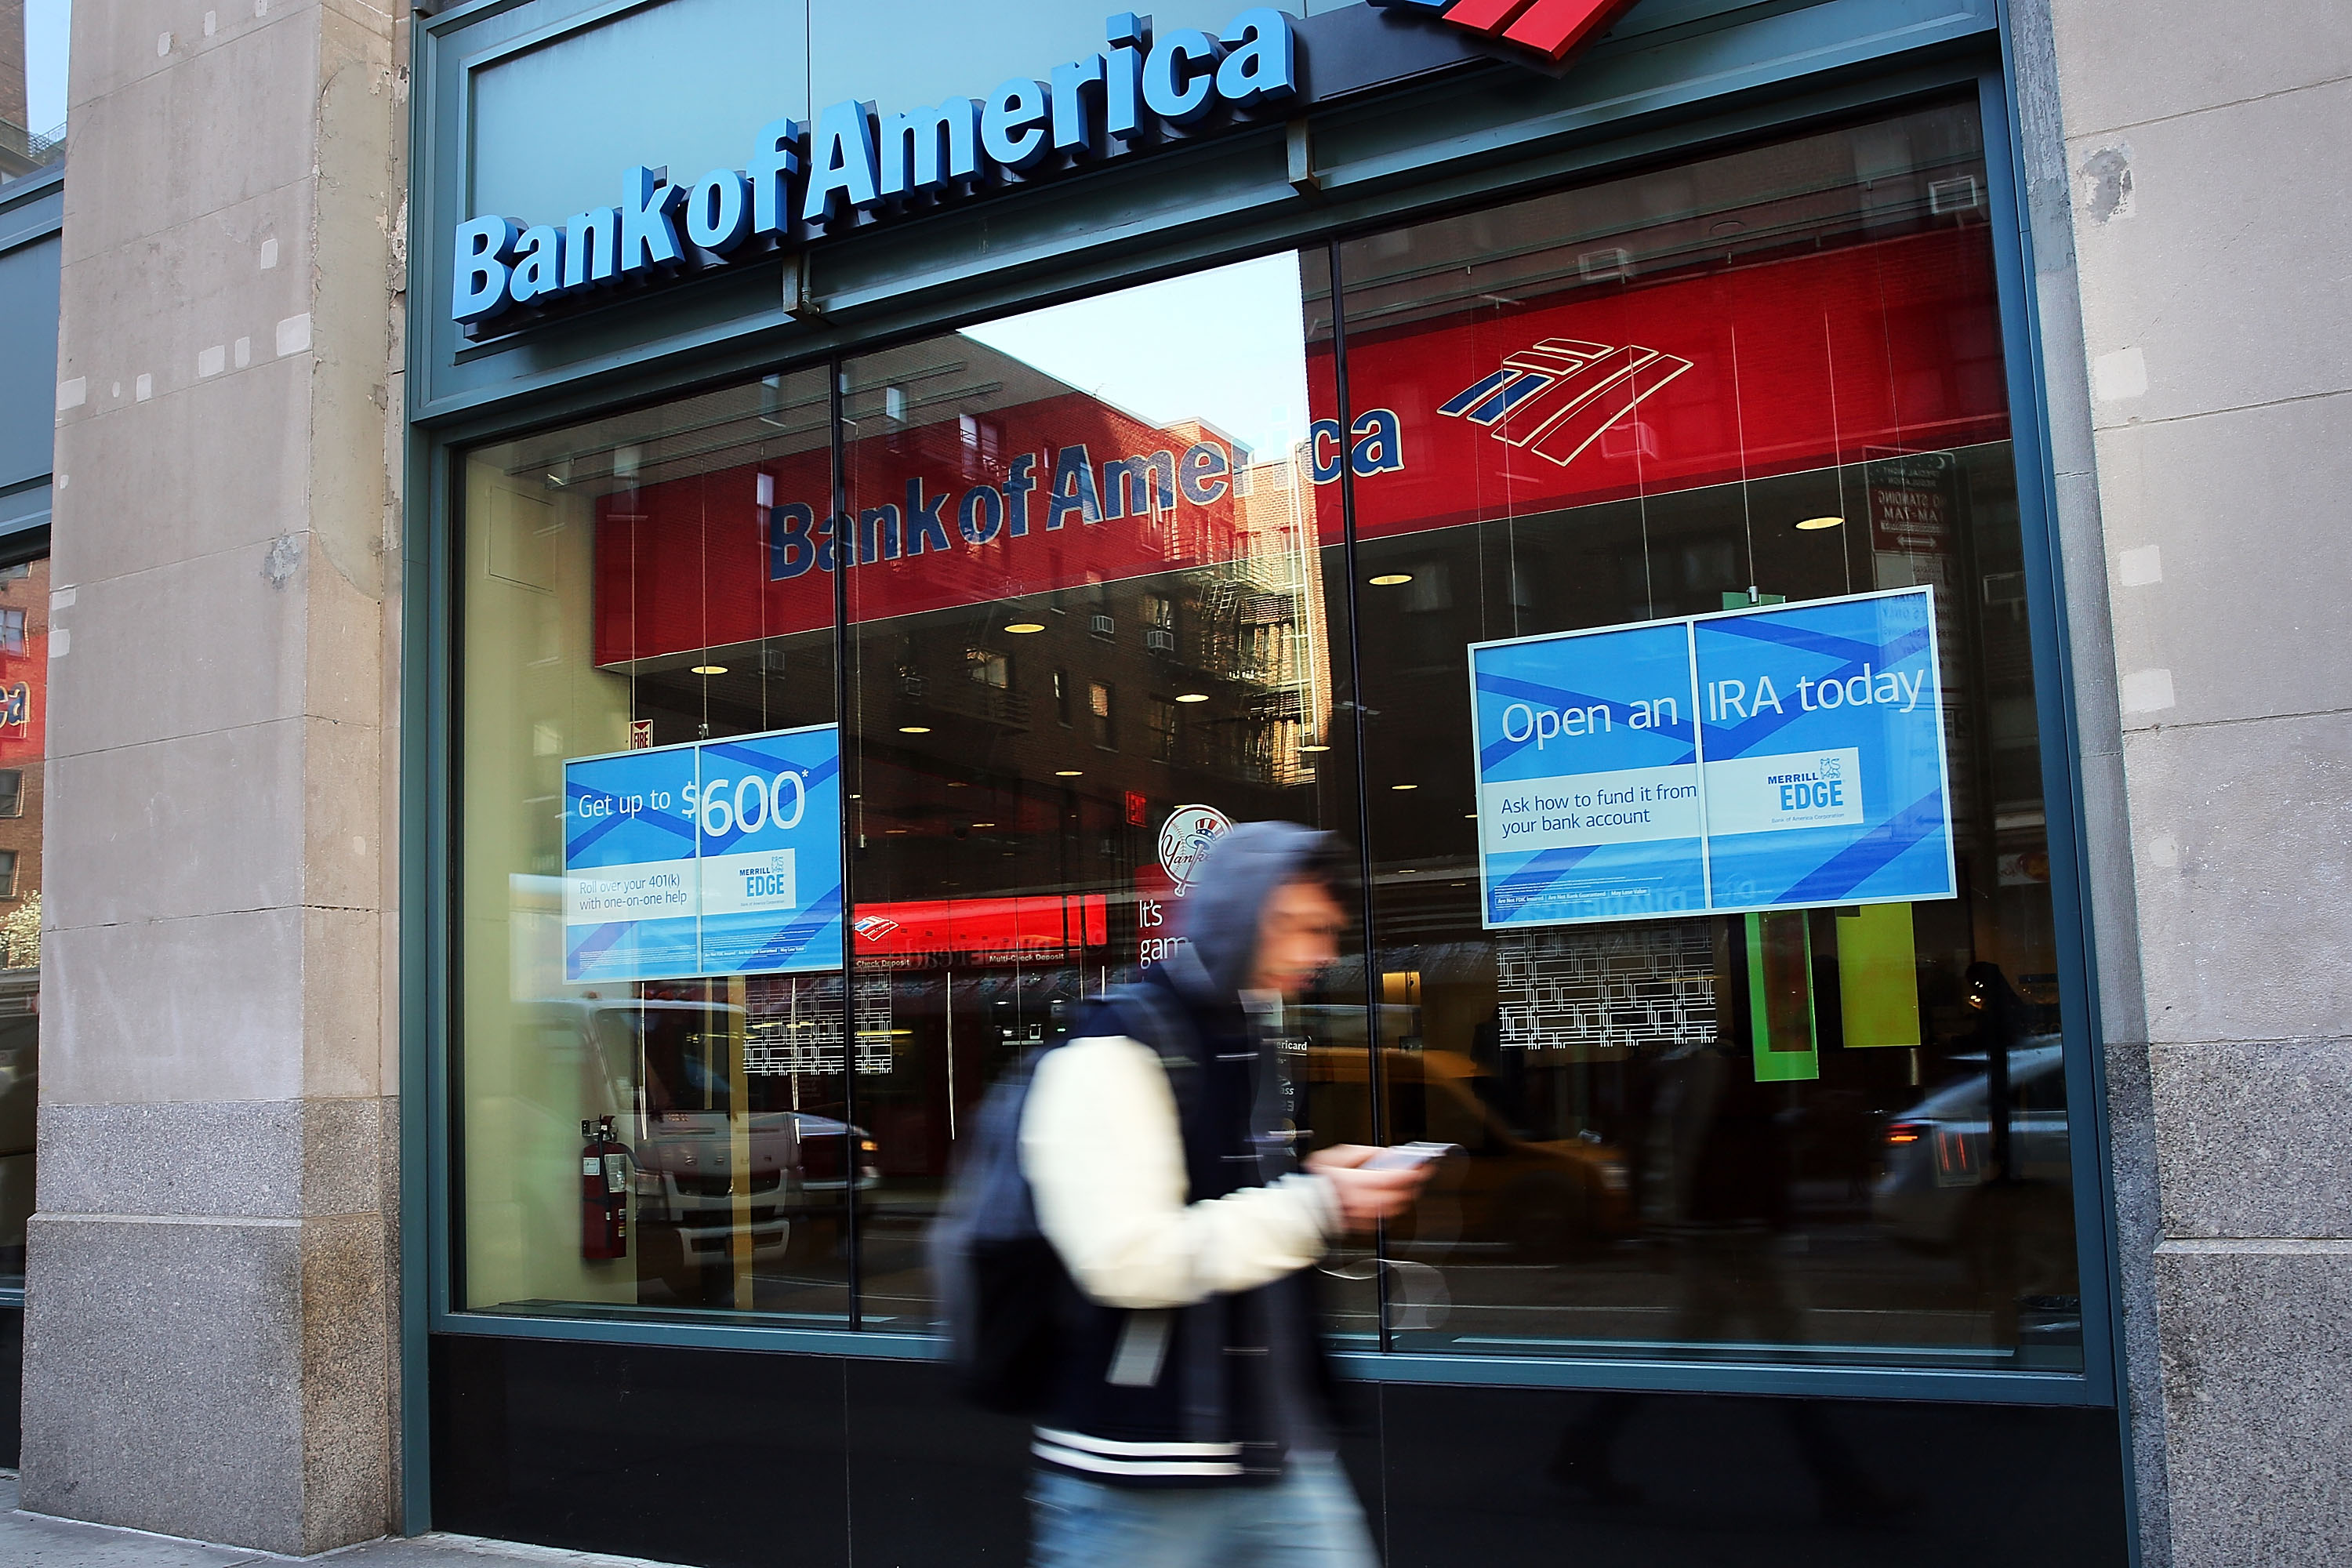 Bank of America news & latest pictures from Newsweek.com